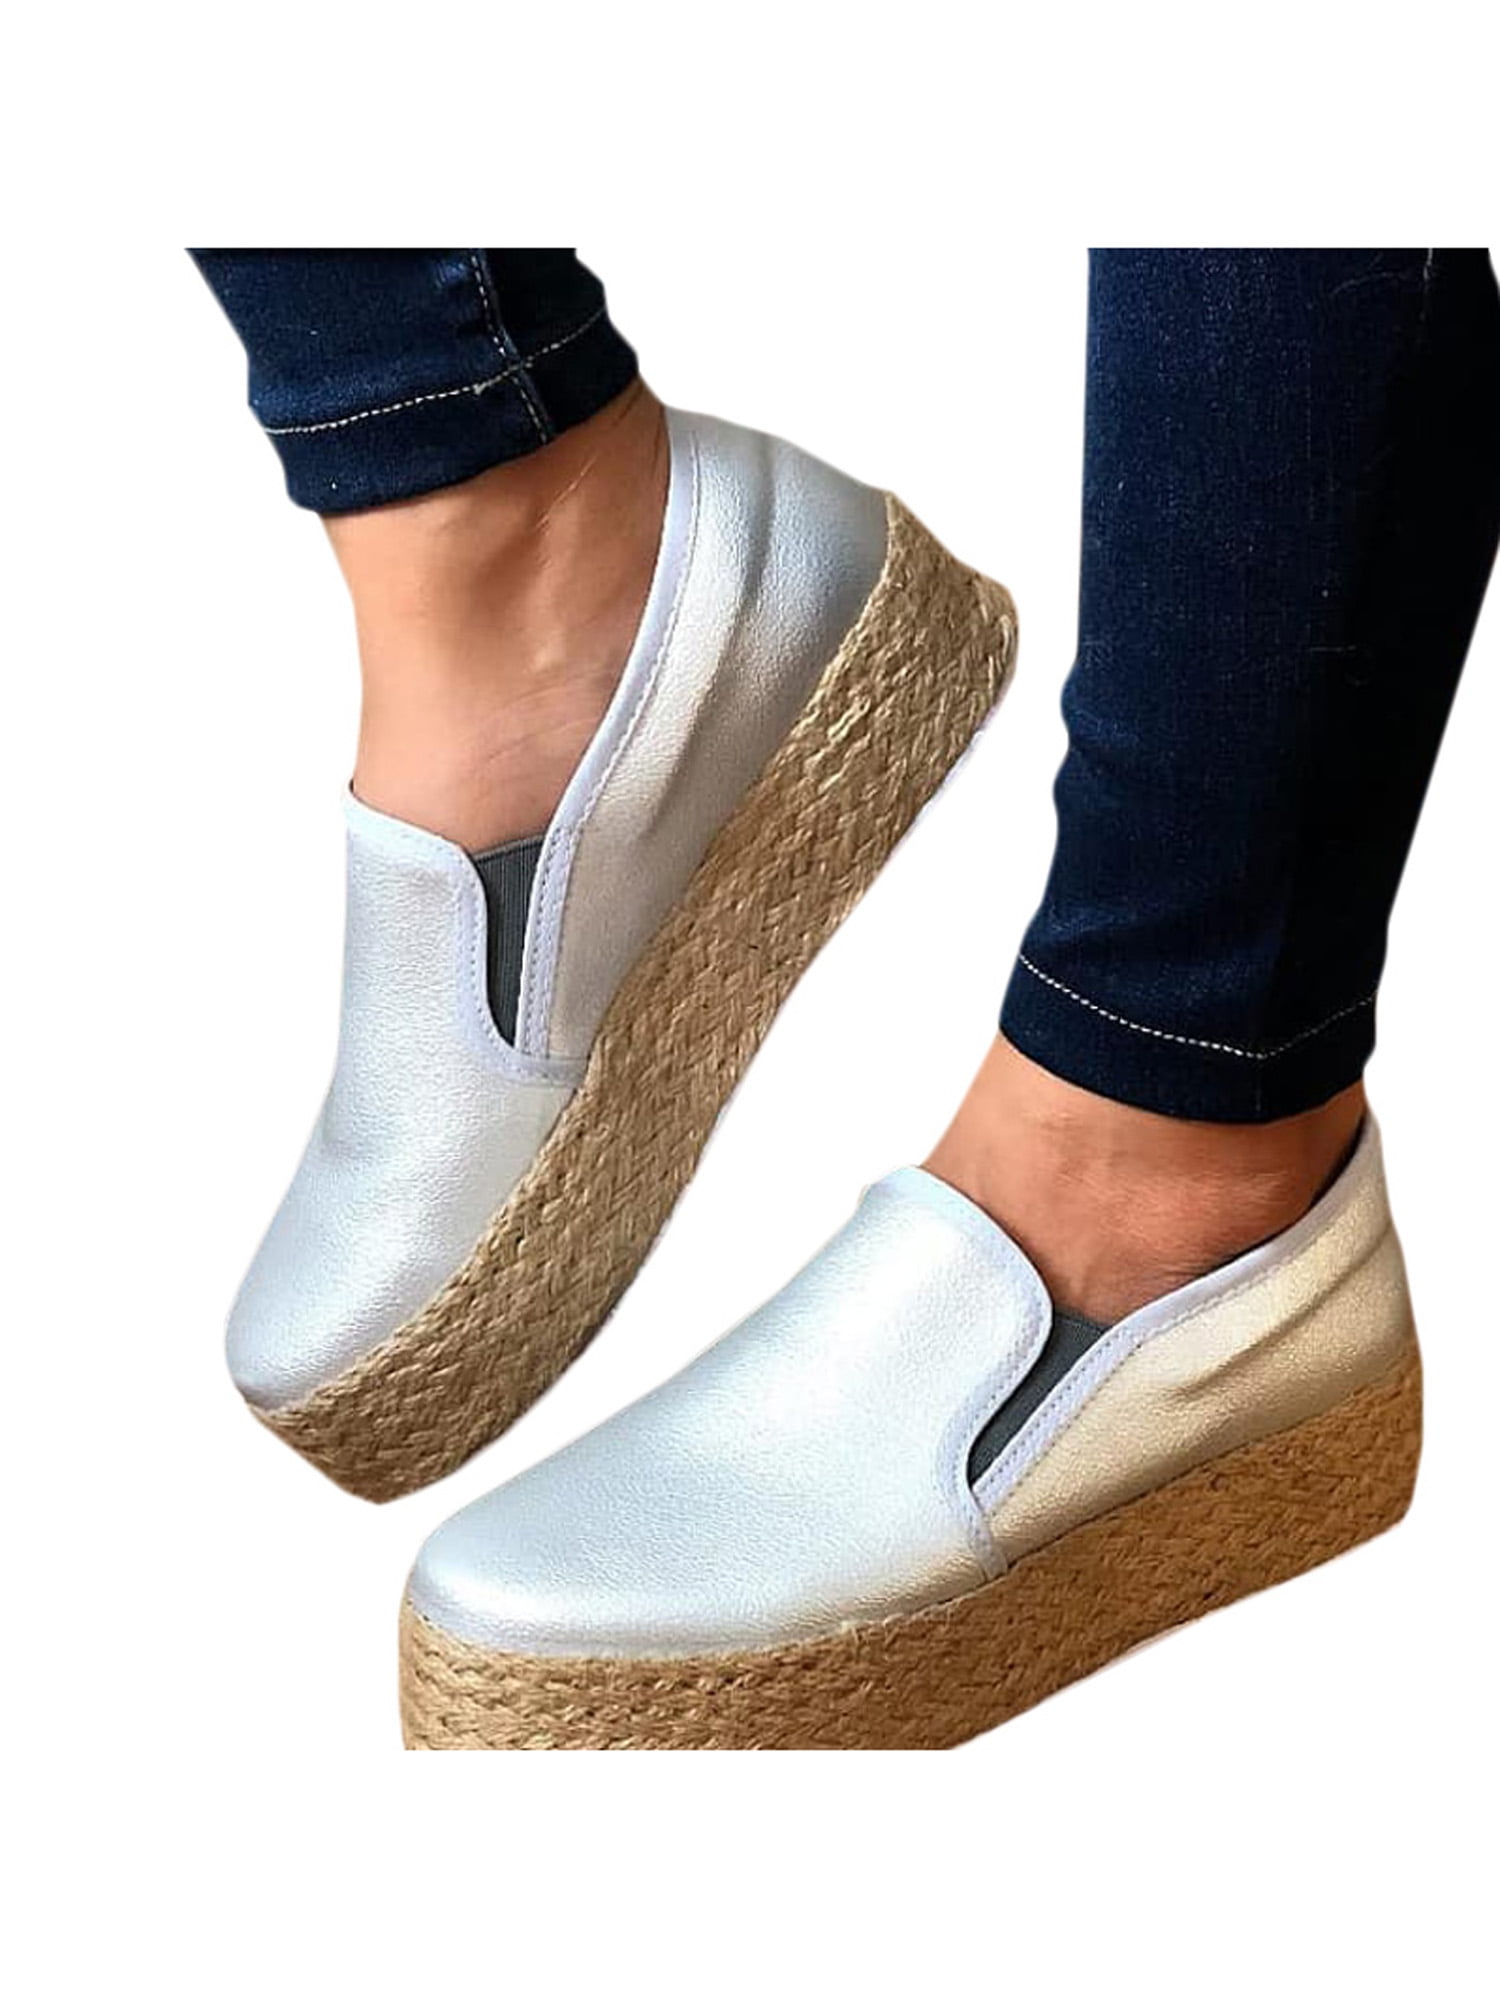 gracosy Womens Lace Breathable Platform Casual Shoes Trainers Slip On Comfort Wedge Moccasin Loafers Thick Heel Pumps Shoes Toning Rocker Shoes Summer Fitness Outdoor Walking Sneaker